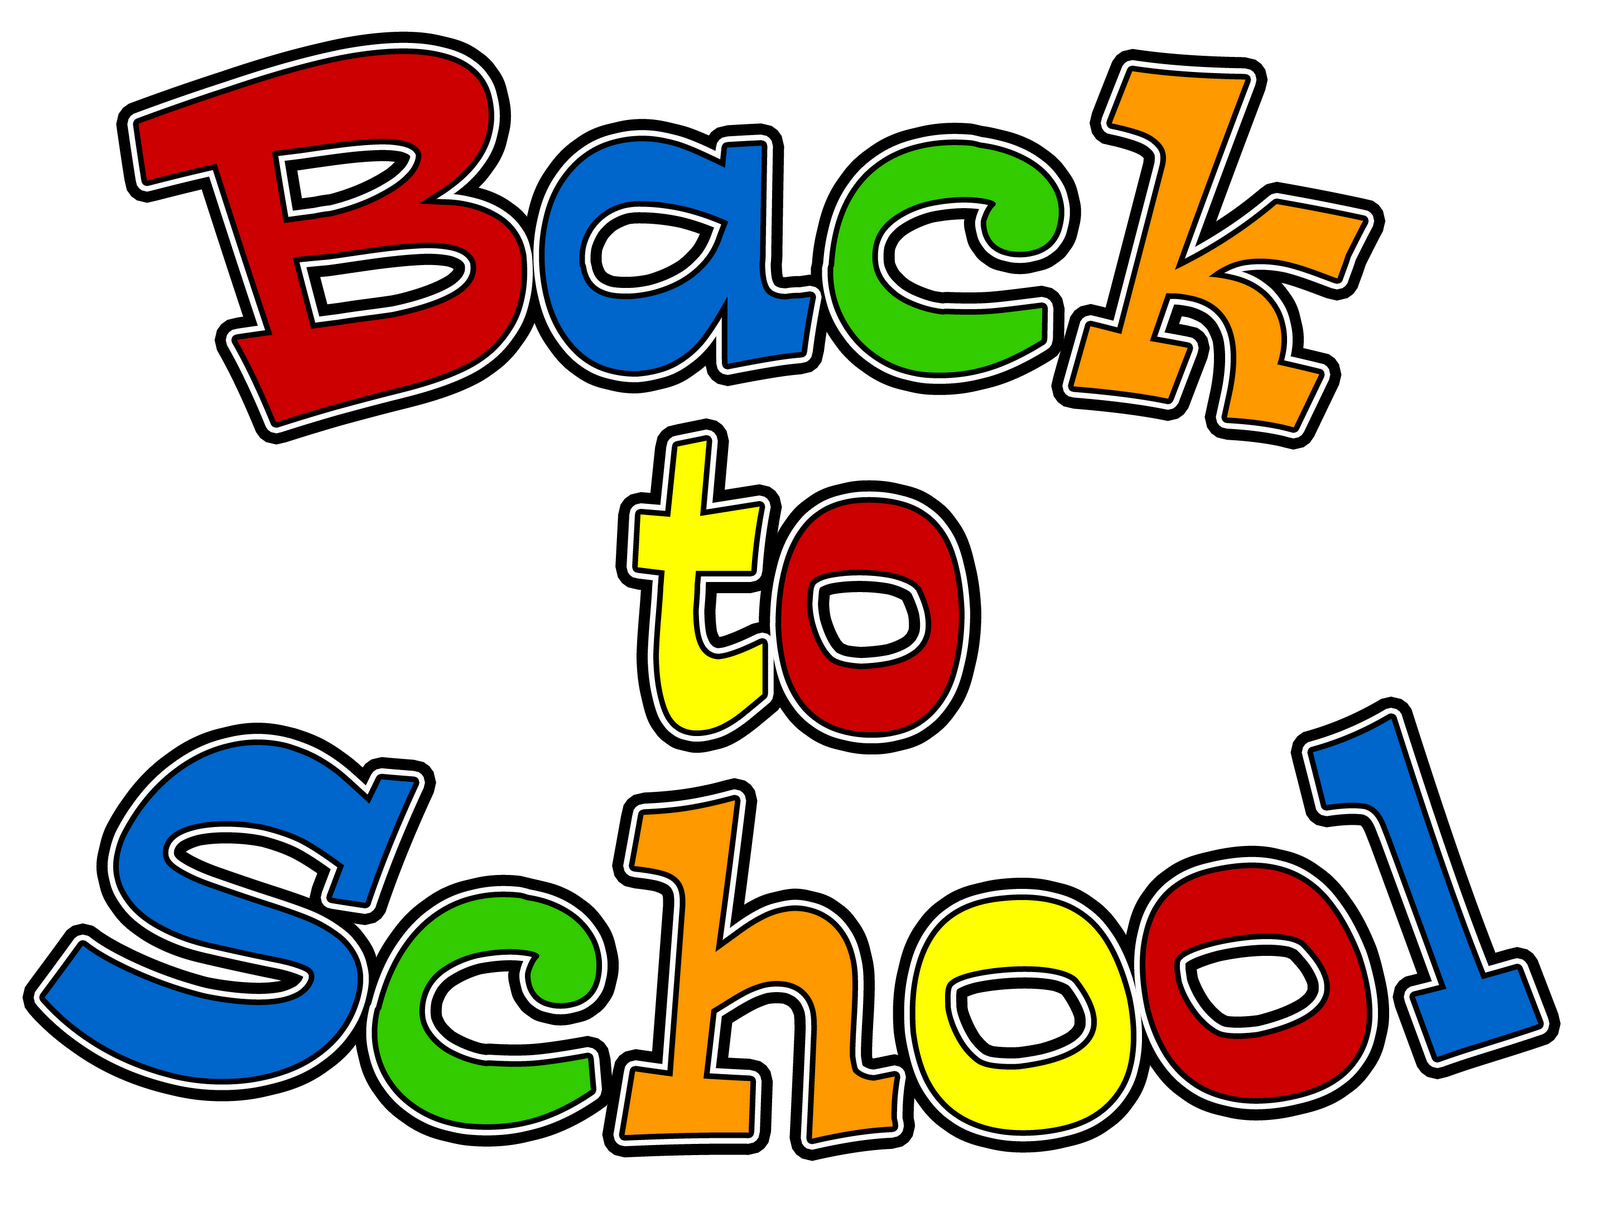 Welcome back to school schoolhouse clipart